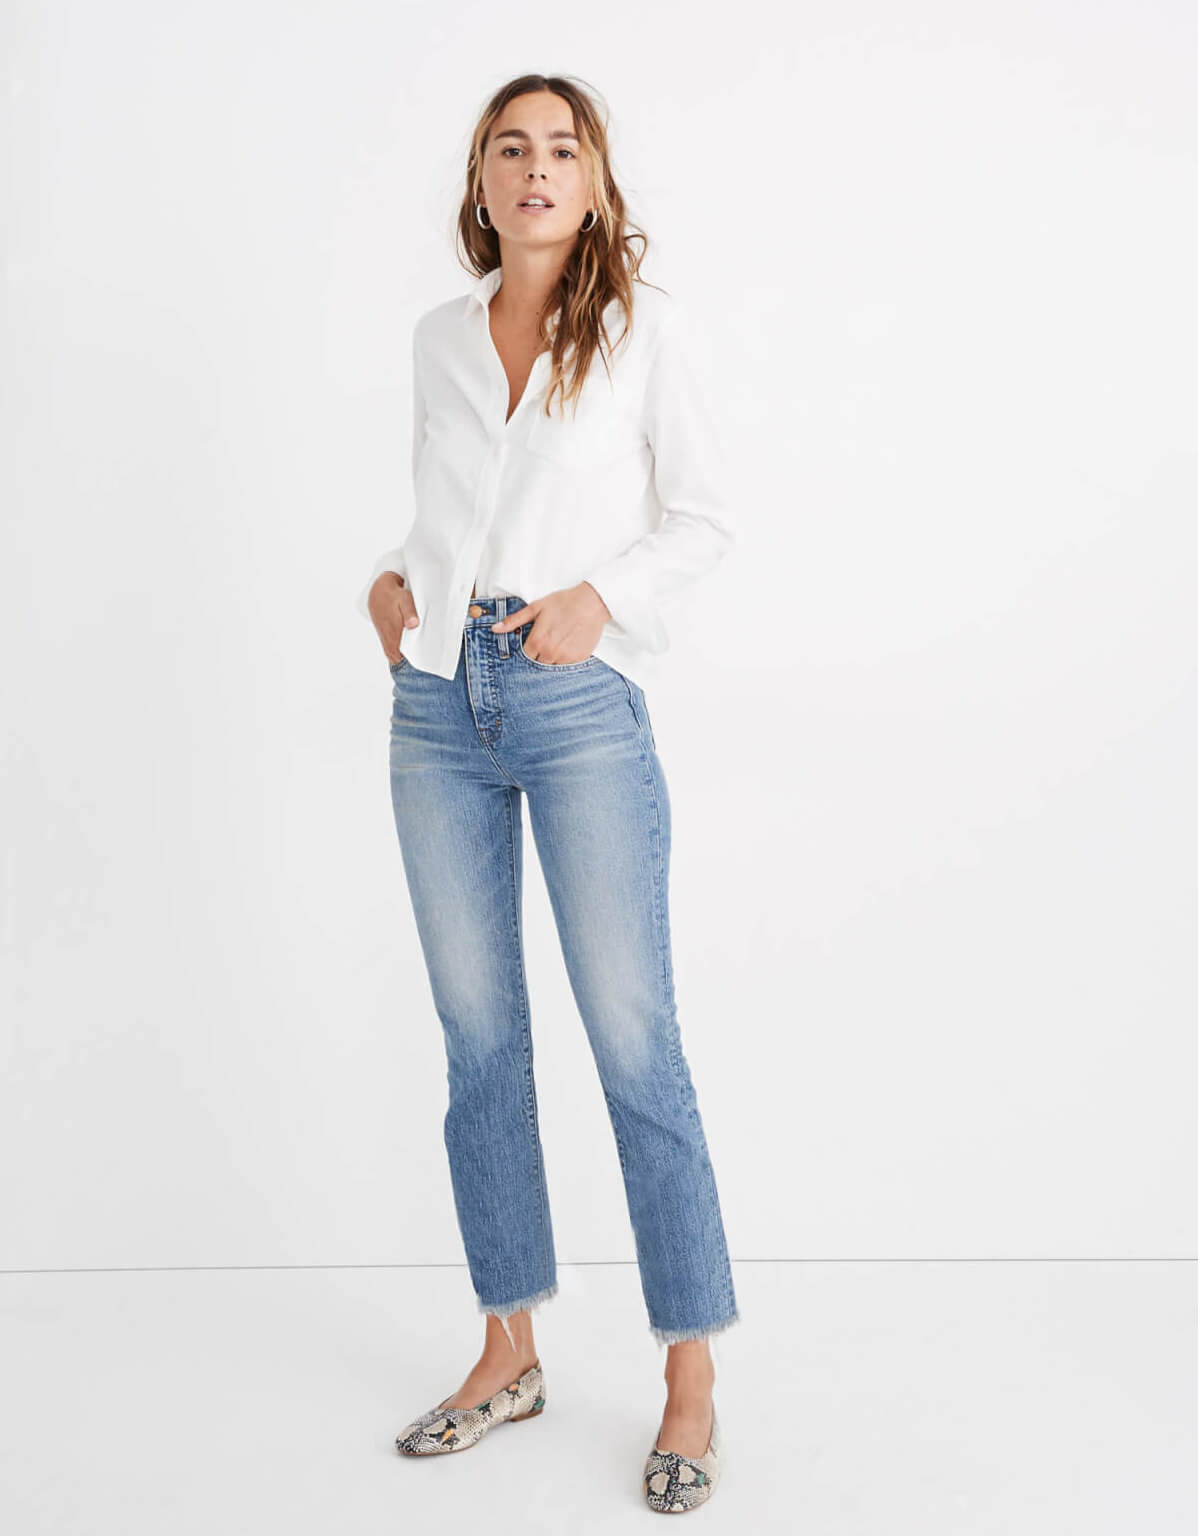 Best Of The Best Women's Jeans For 2023: Top 5 Denim Styles Most ...